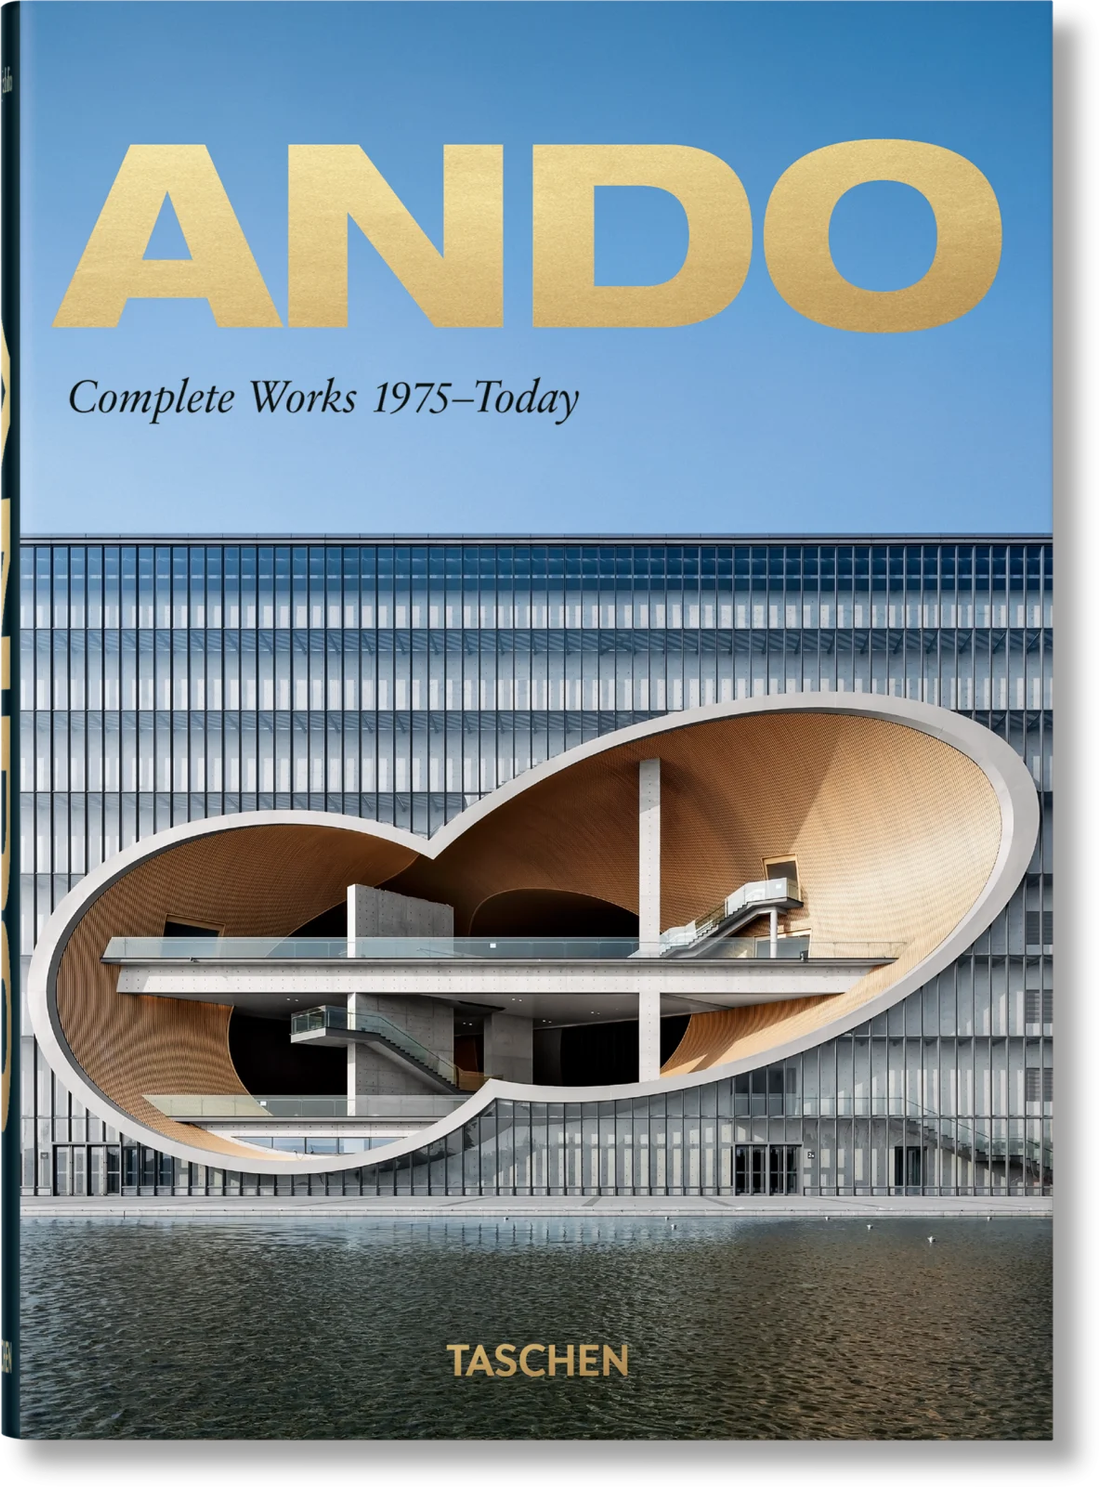 Ando Complete Works 1975 - Today